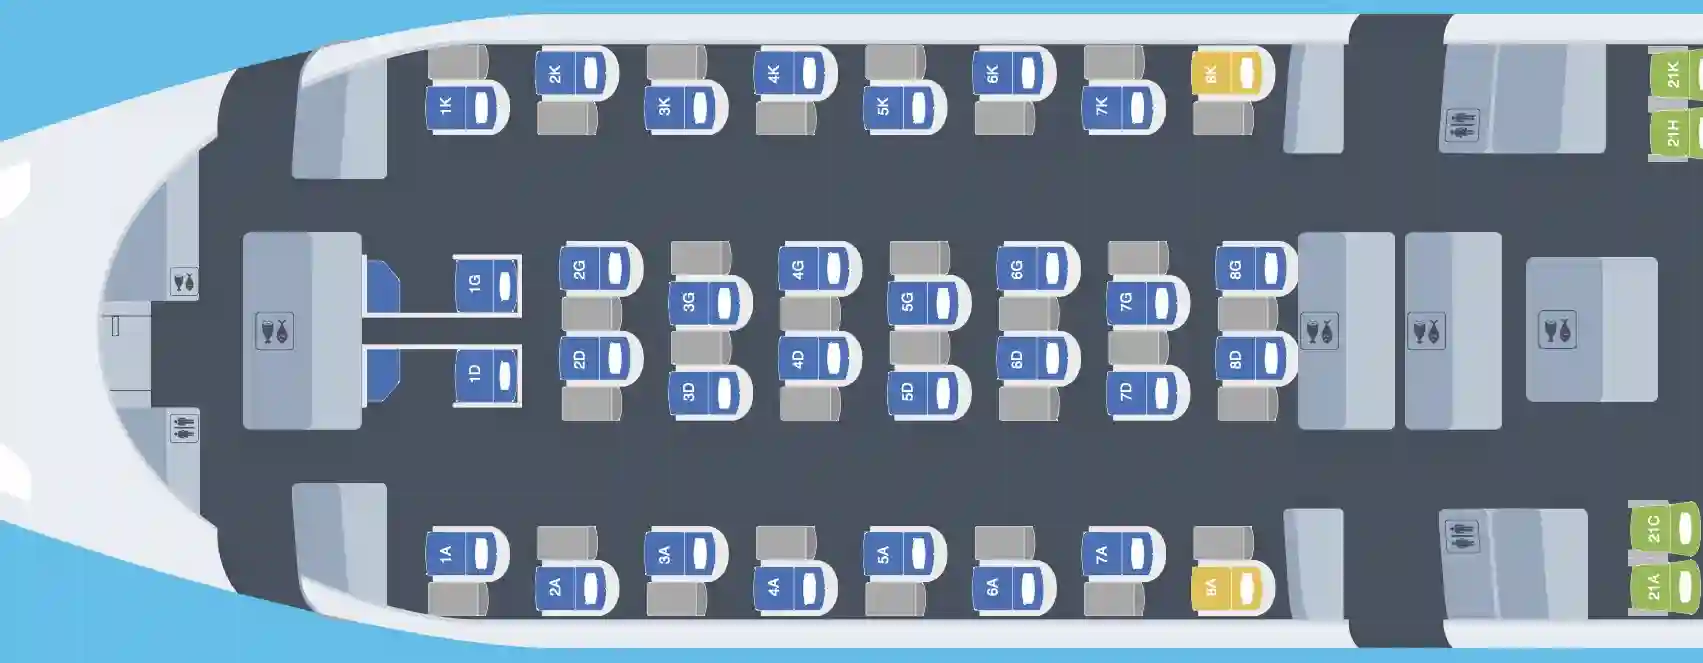 a map of a room with seats and tables